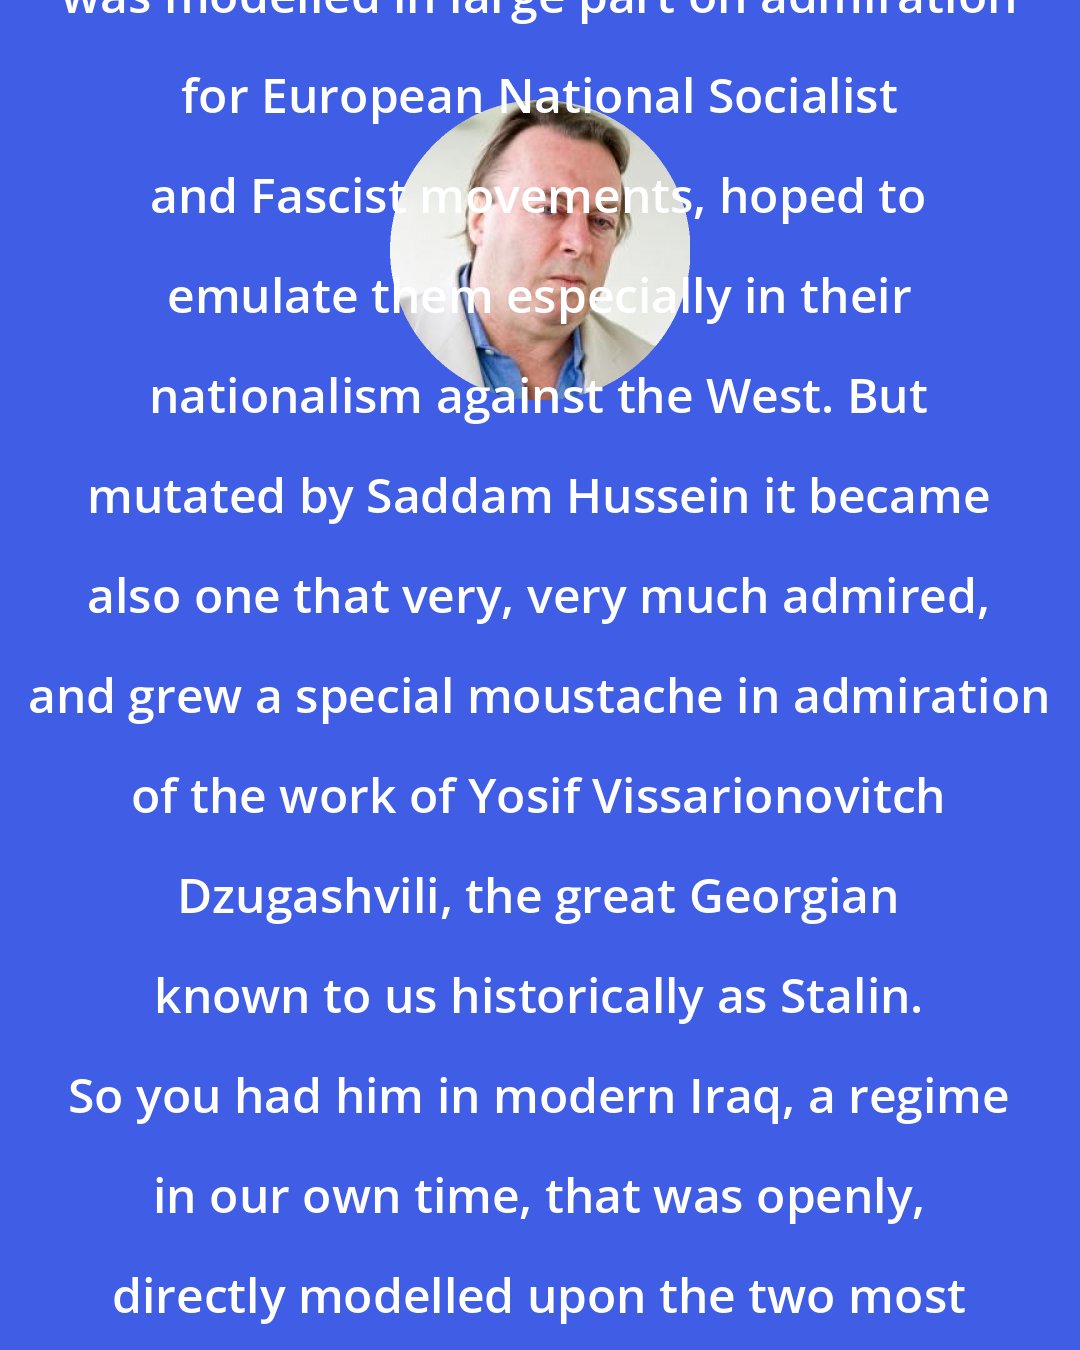 Christopher Hitchens: The Iraqi Baath Socialist Party was modelled in large part on admiration for European National Socialist and Fascist movements, hoped to emulate them especially in their nationalism against the West. But mutated by Saddam Hussein it became also one that very, very much admired, and grew a special moustache in admiration of the work of Yosif Vissarionovitch Dzugashvili, the great Georgian known to us historically as Stalin. So you had him in modern Iraq, a regime in our own time, that was openly, directly modelled upon the two most extreme examples of European totalitarianism.